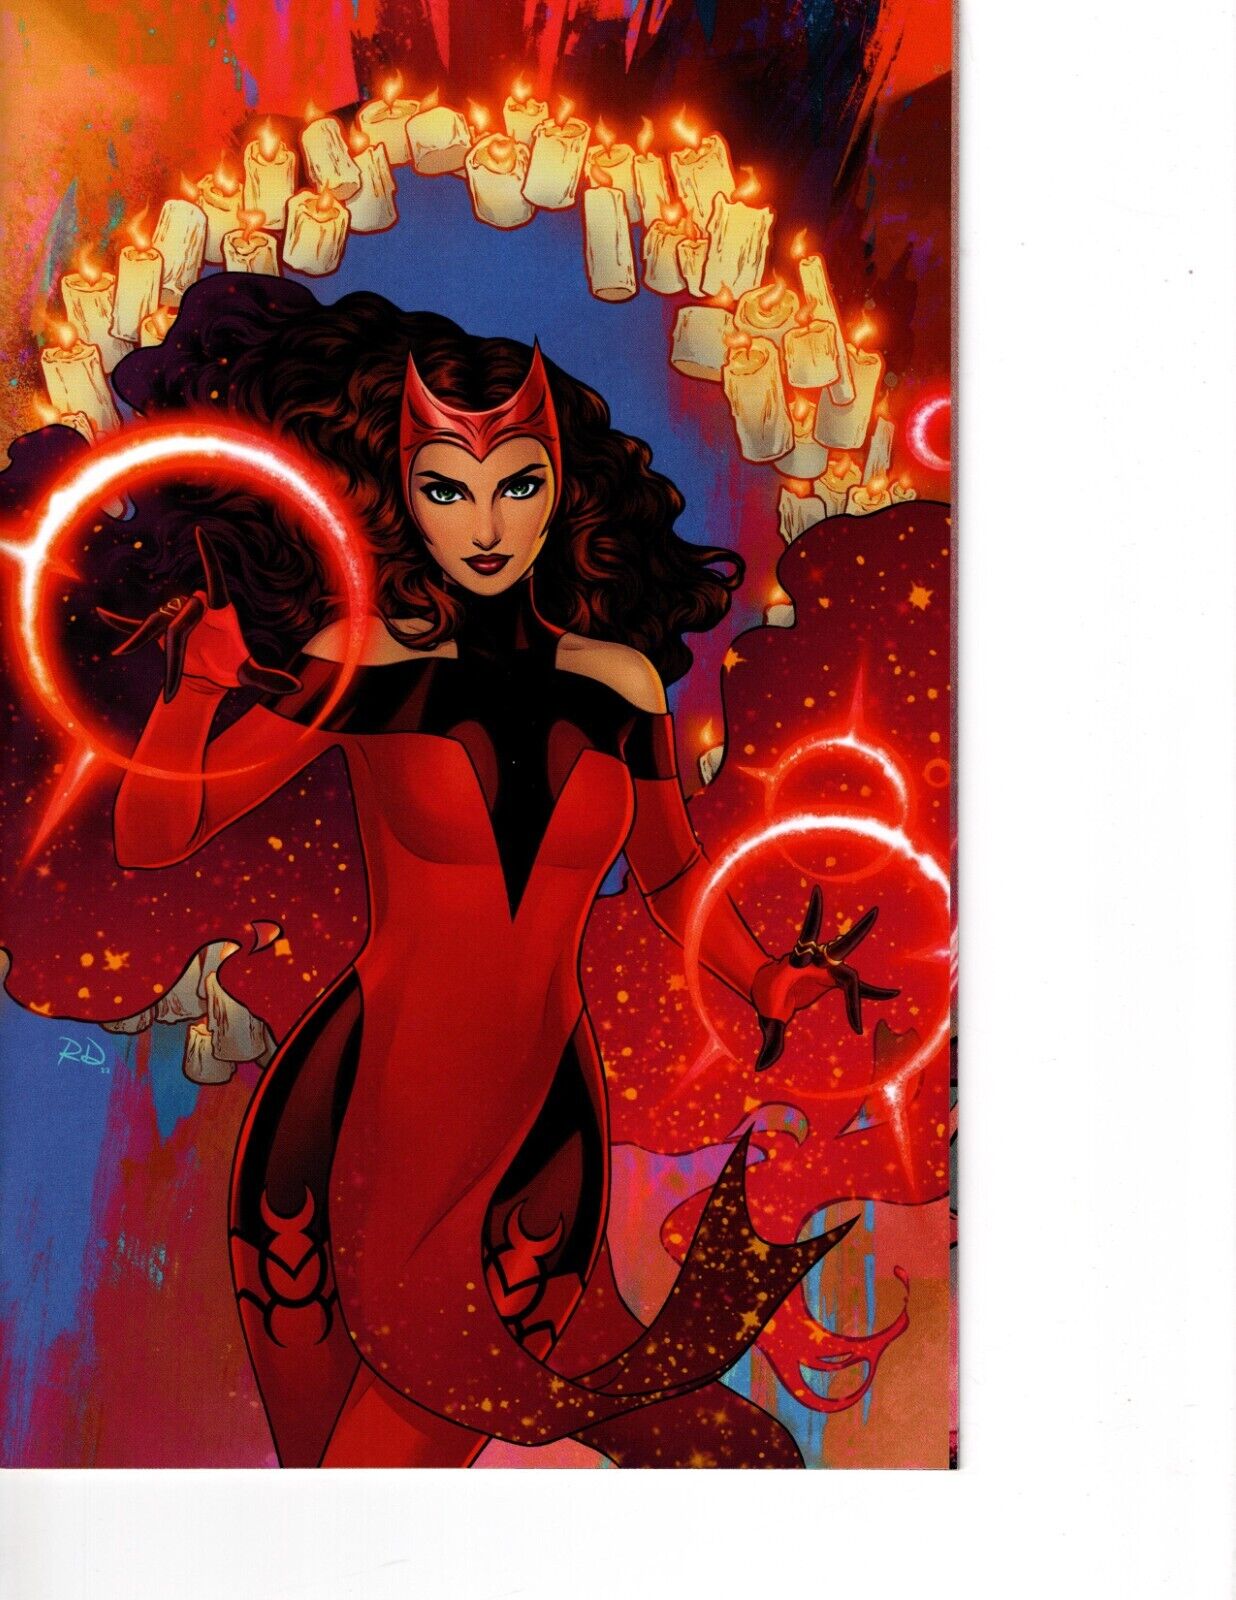 Scarlet Witch by James Robinson: The Complete Collection by James